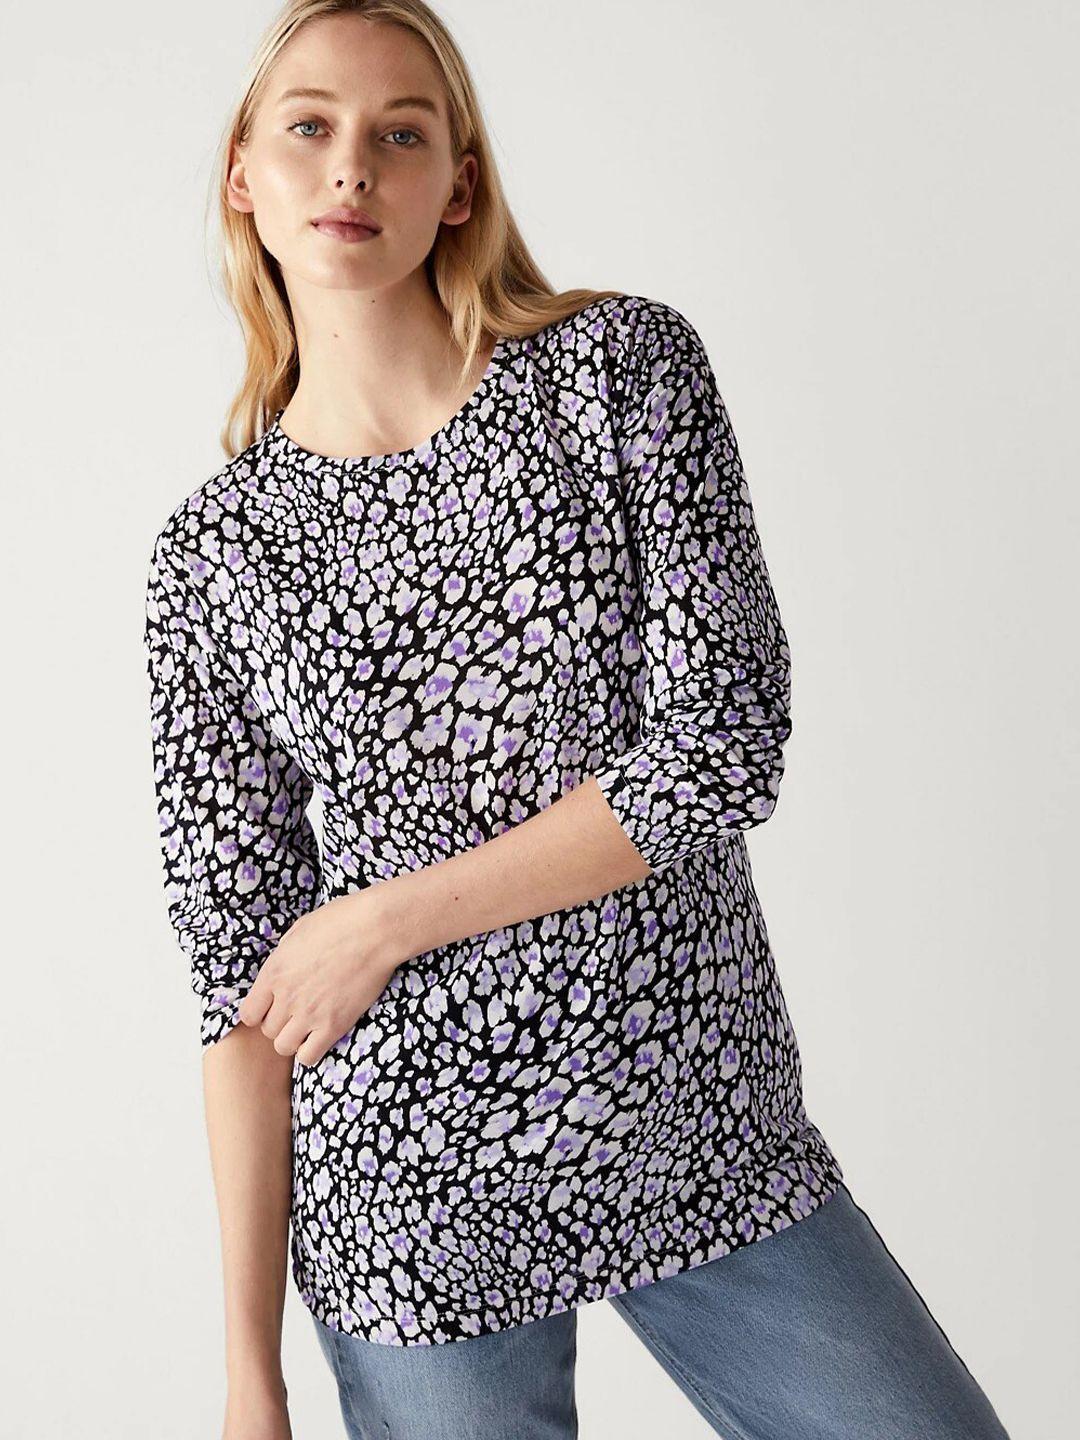 marks & spencer abstract printed cuffed sleeve top